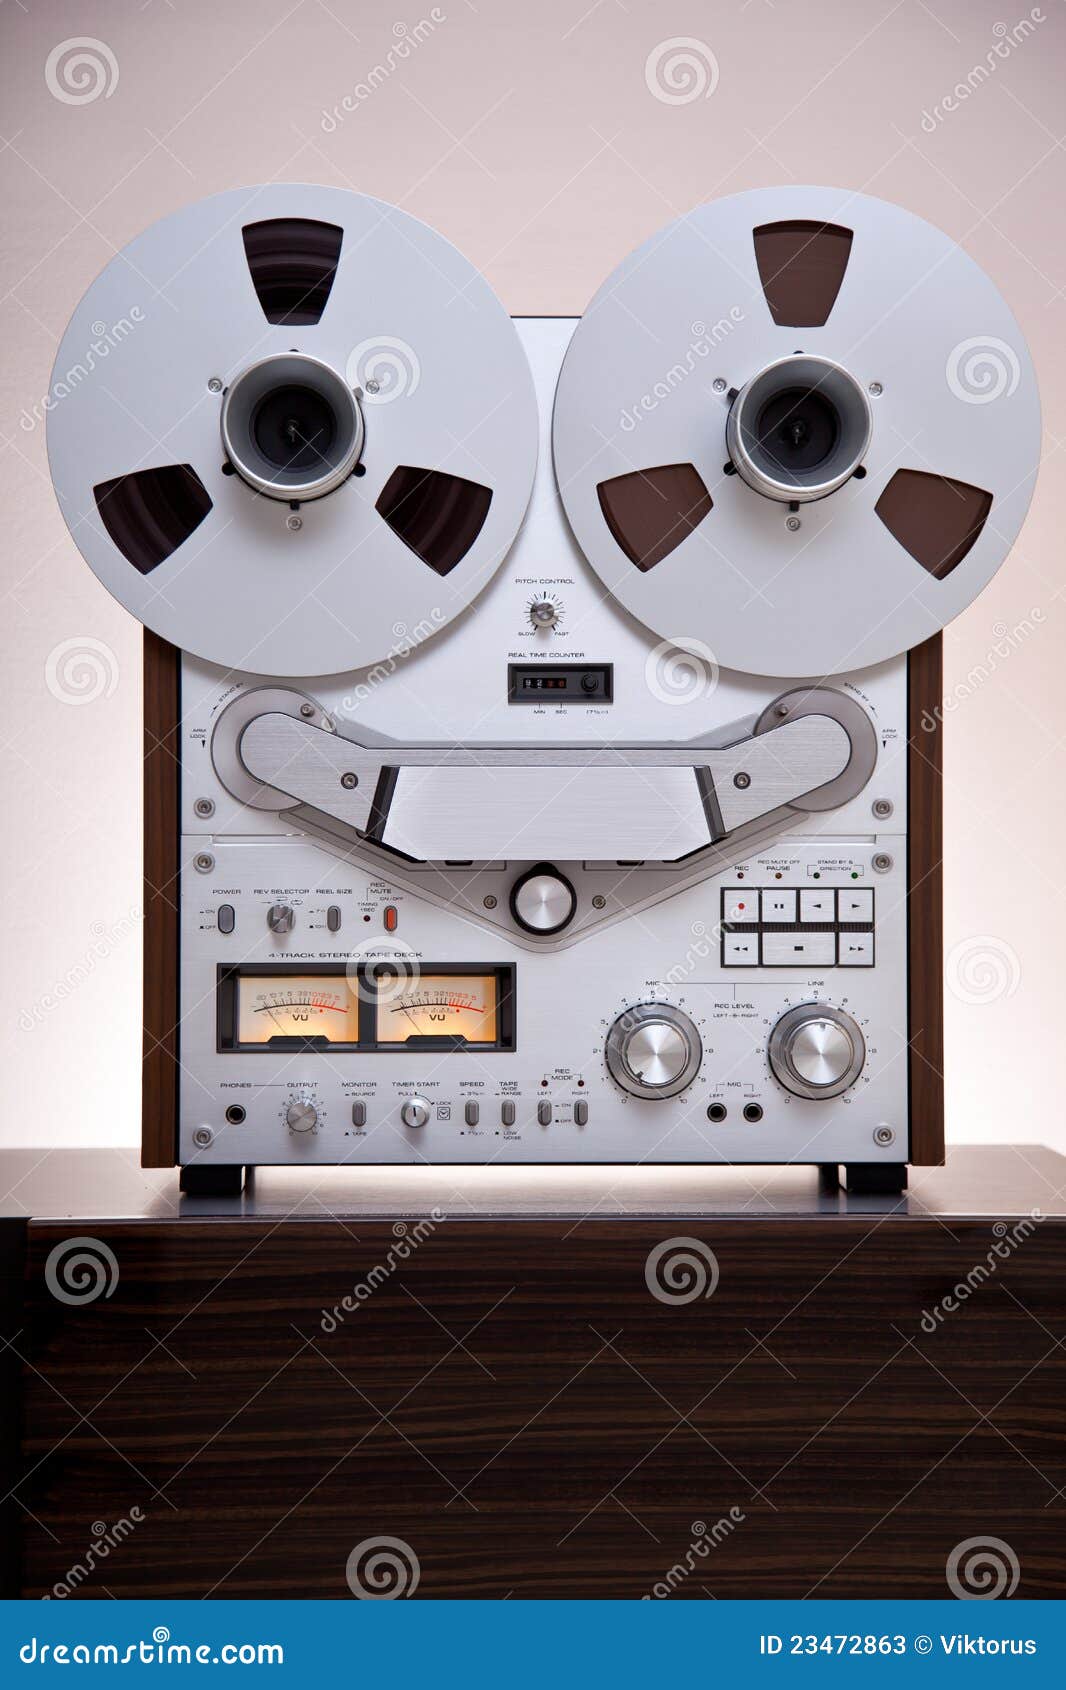 Analog Stereo Open Reel Tape Deck Recorder Stock Image - Image of record,  silver: 23472863